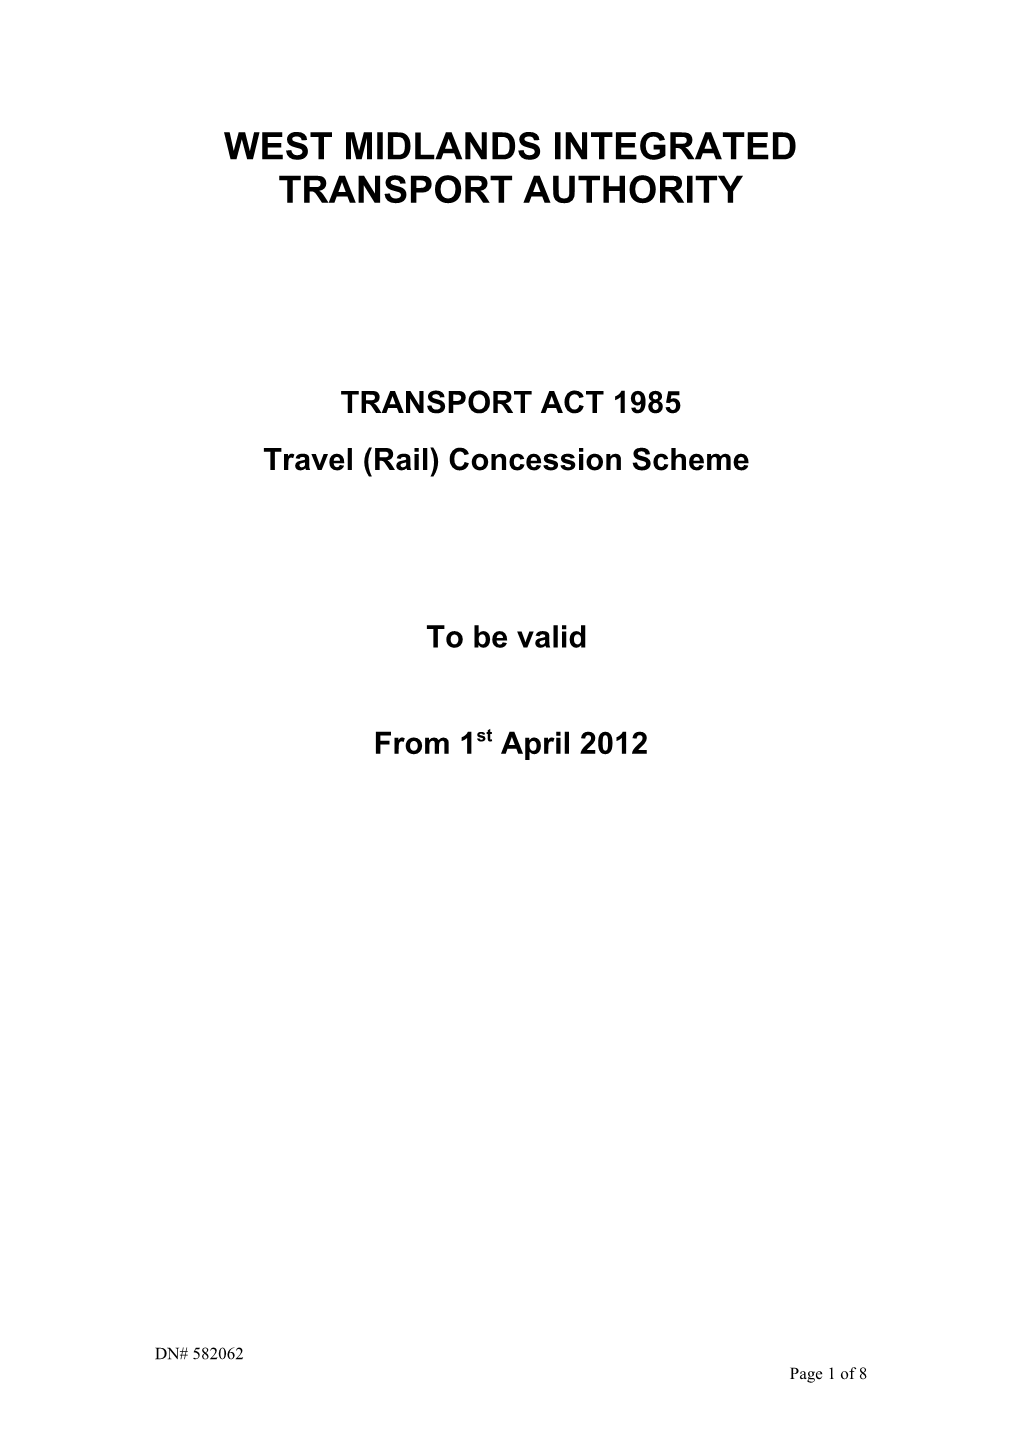 West Midlands Integrated Transport Authority